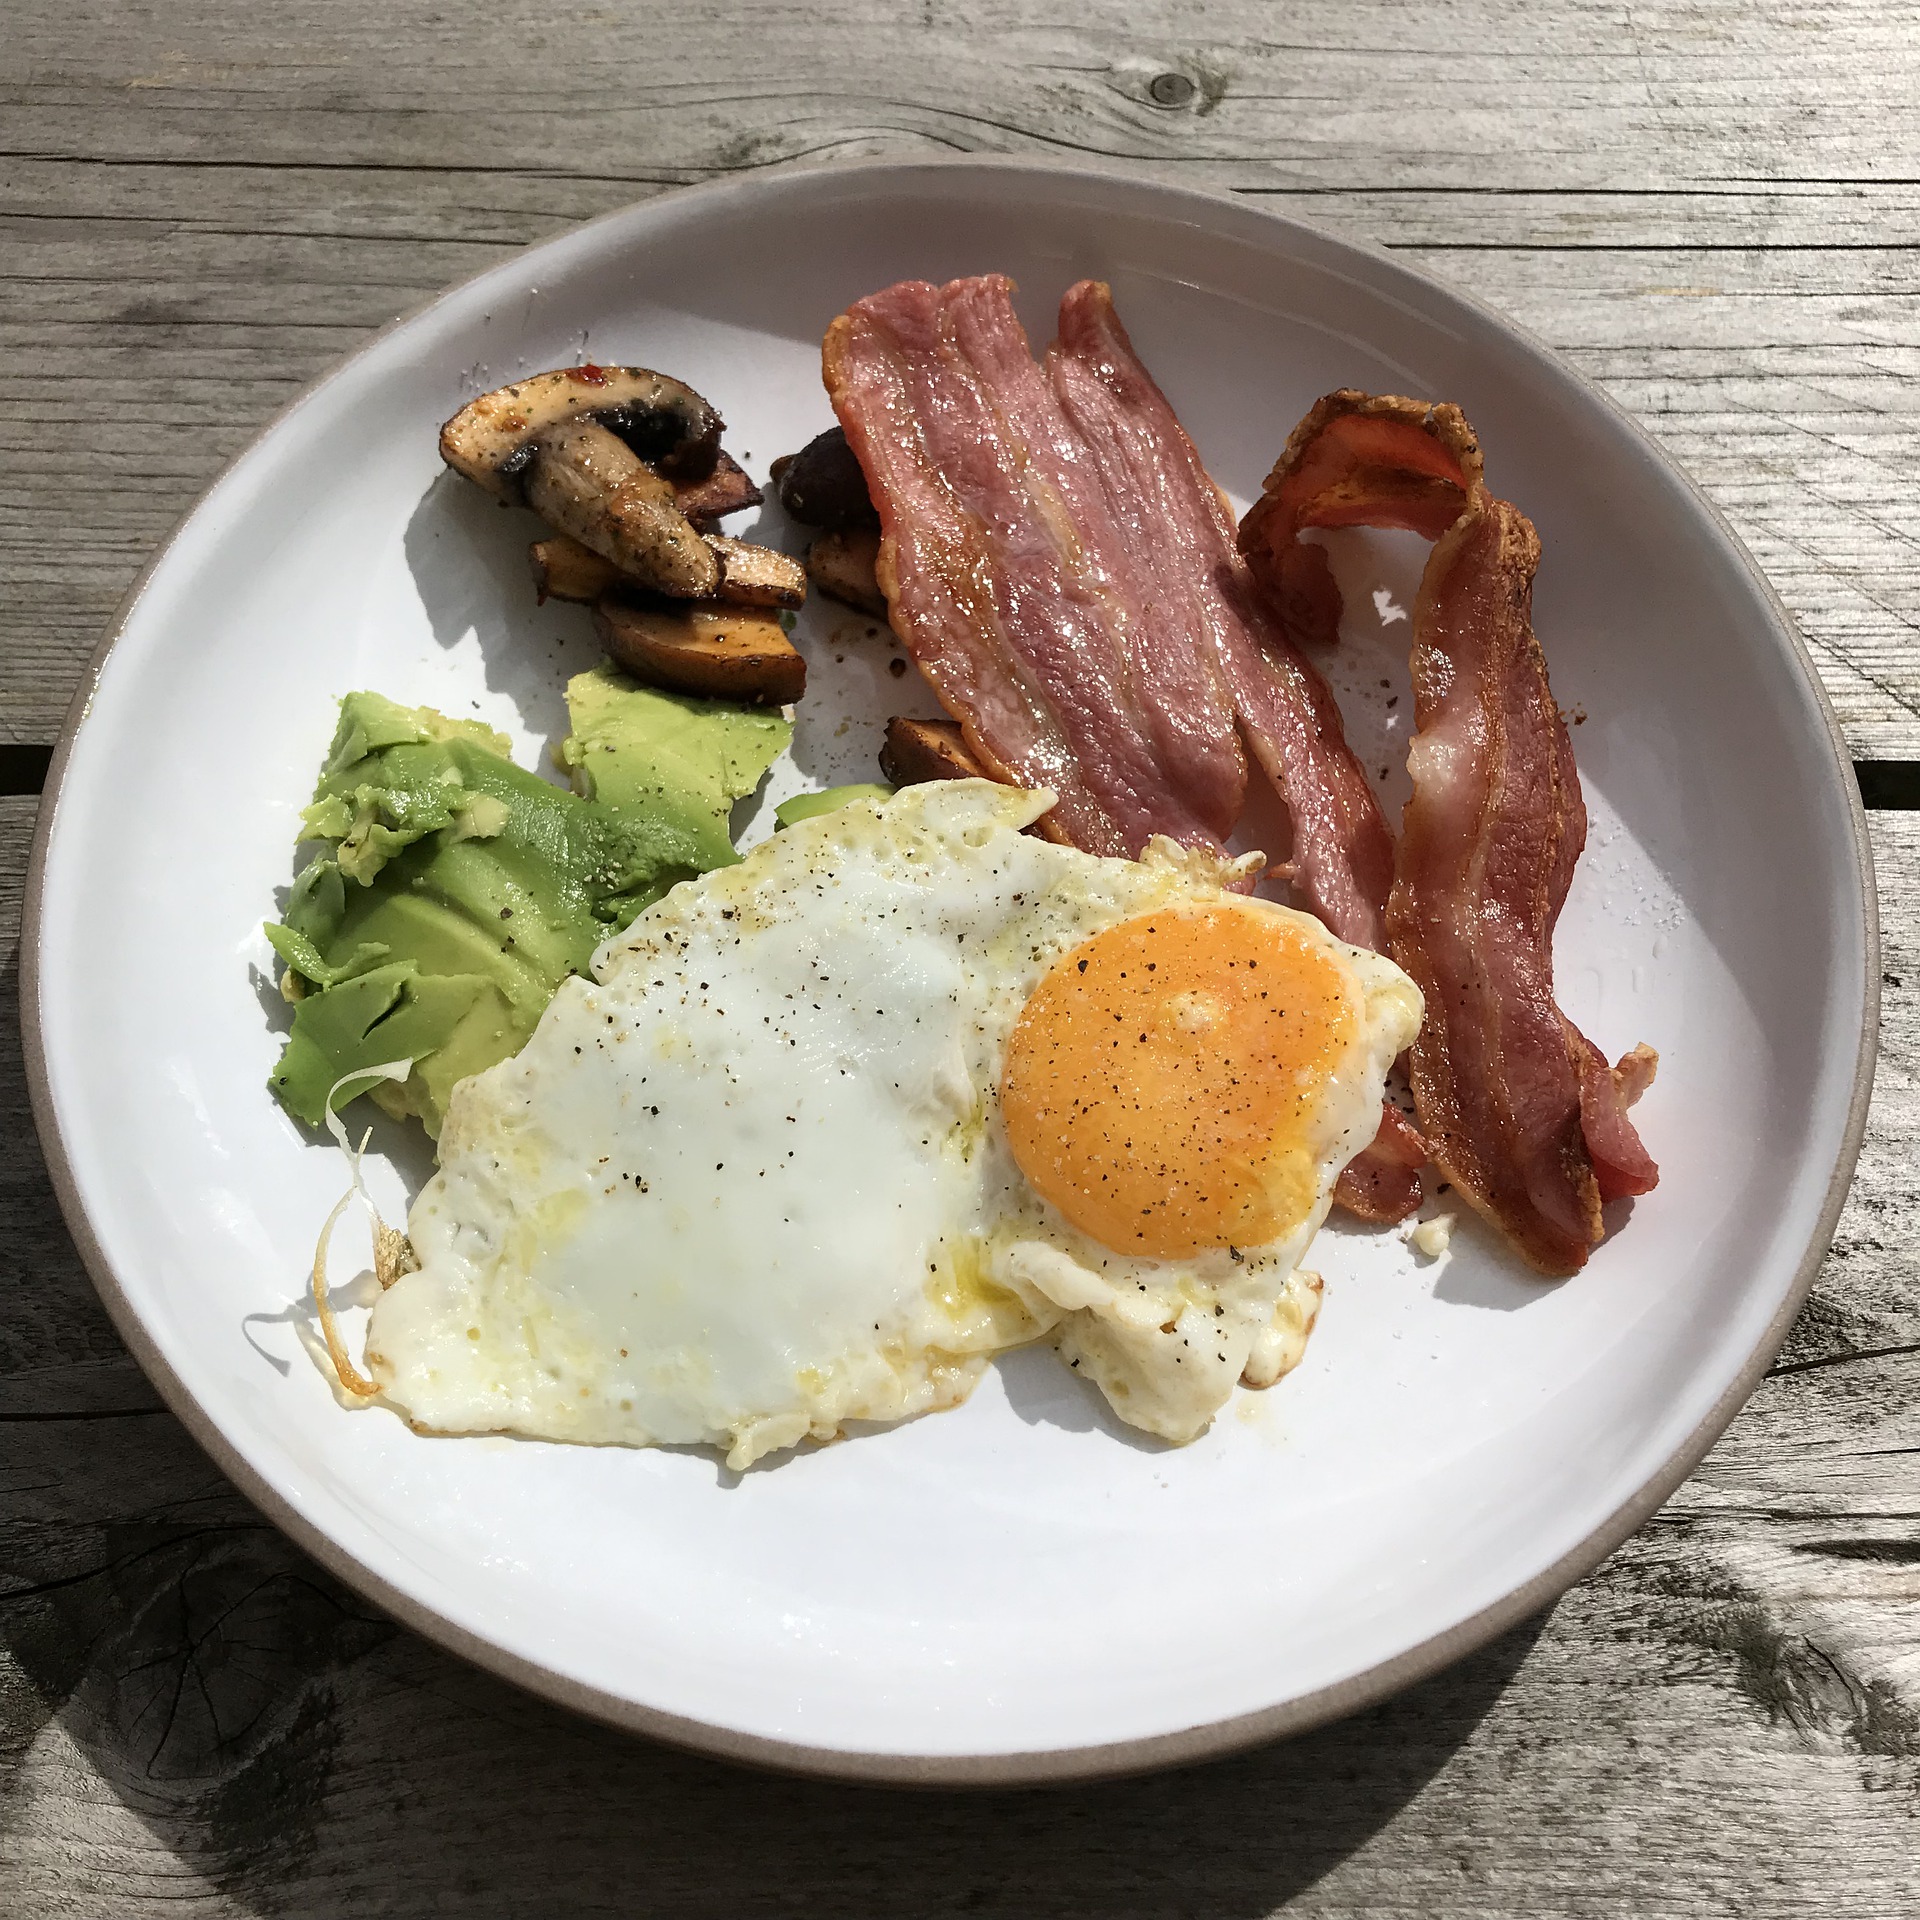 A white plate filled with some bacons, eggs, avocado, and meat